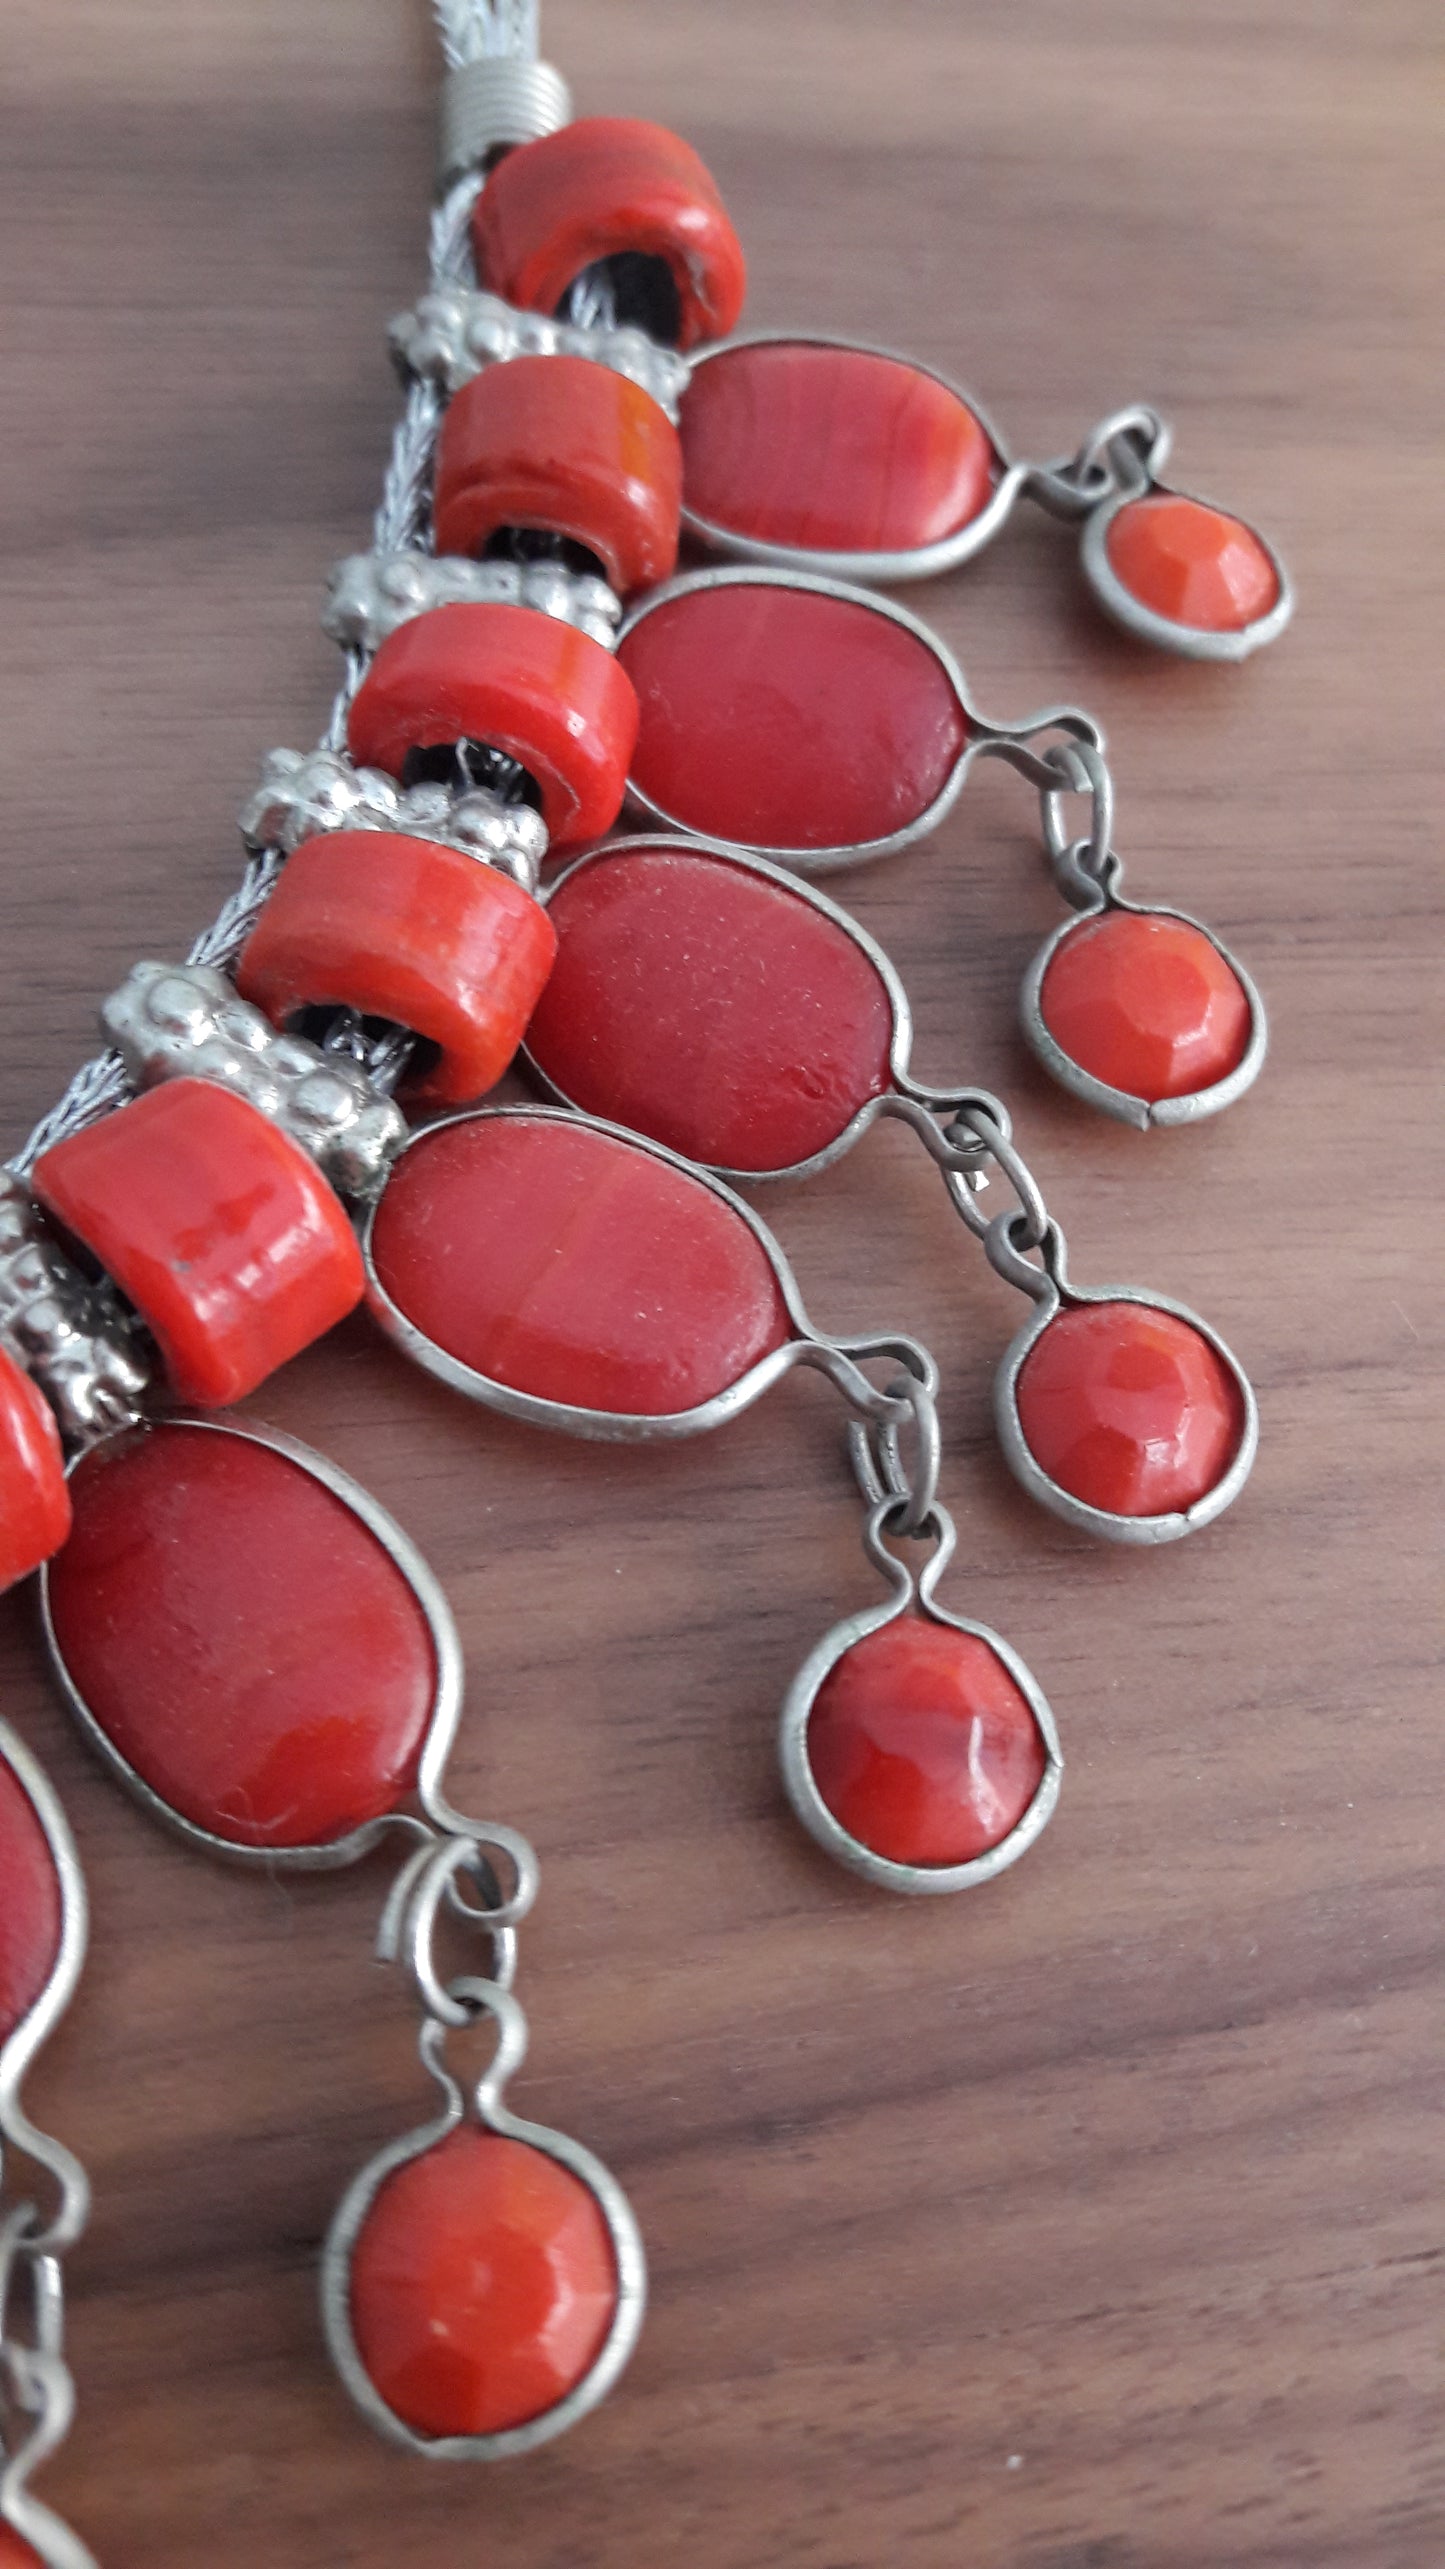 Ethnic Red Stone Chandelier Necklace